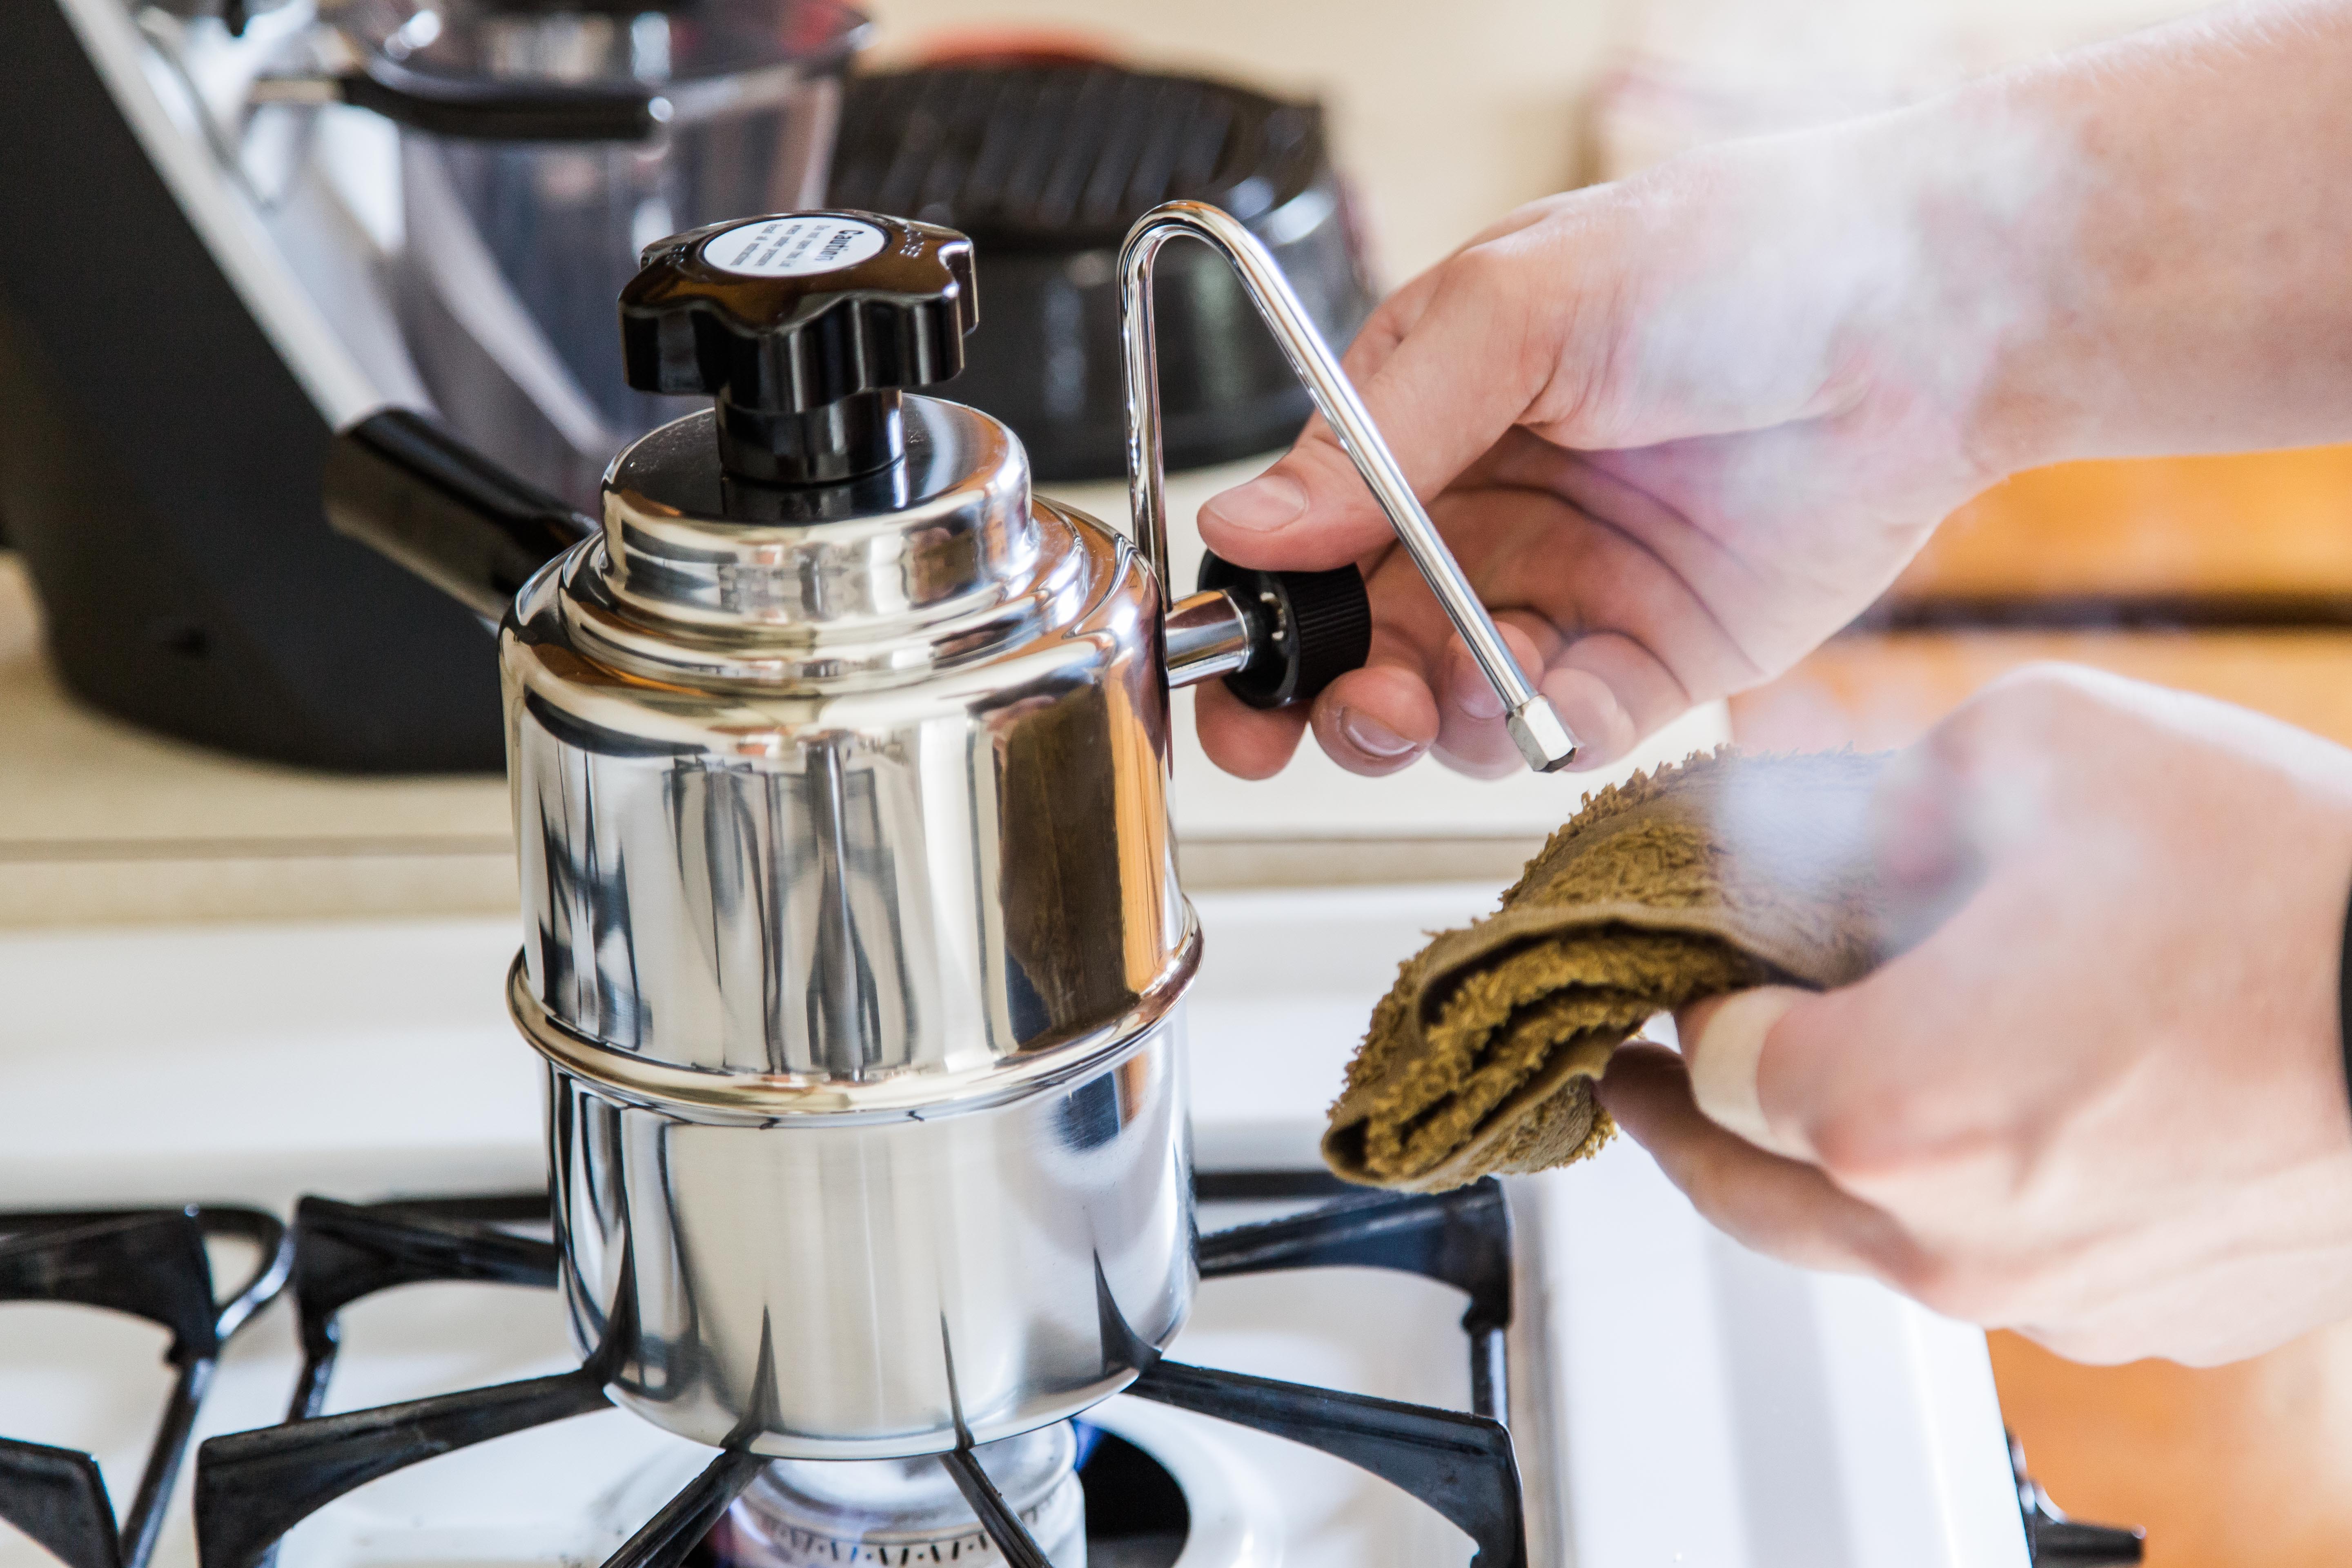 Prima Coffee Equipment - STC Stand X, butane, and Bellman stovetop steamer  to give you the ultimate travel set up for steaming milk if you're without  gas or electricity. Check out our